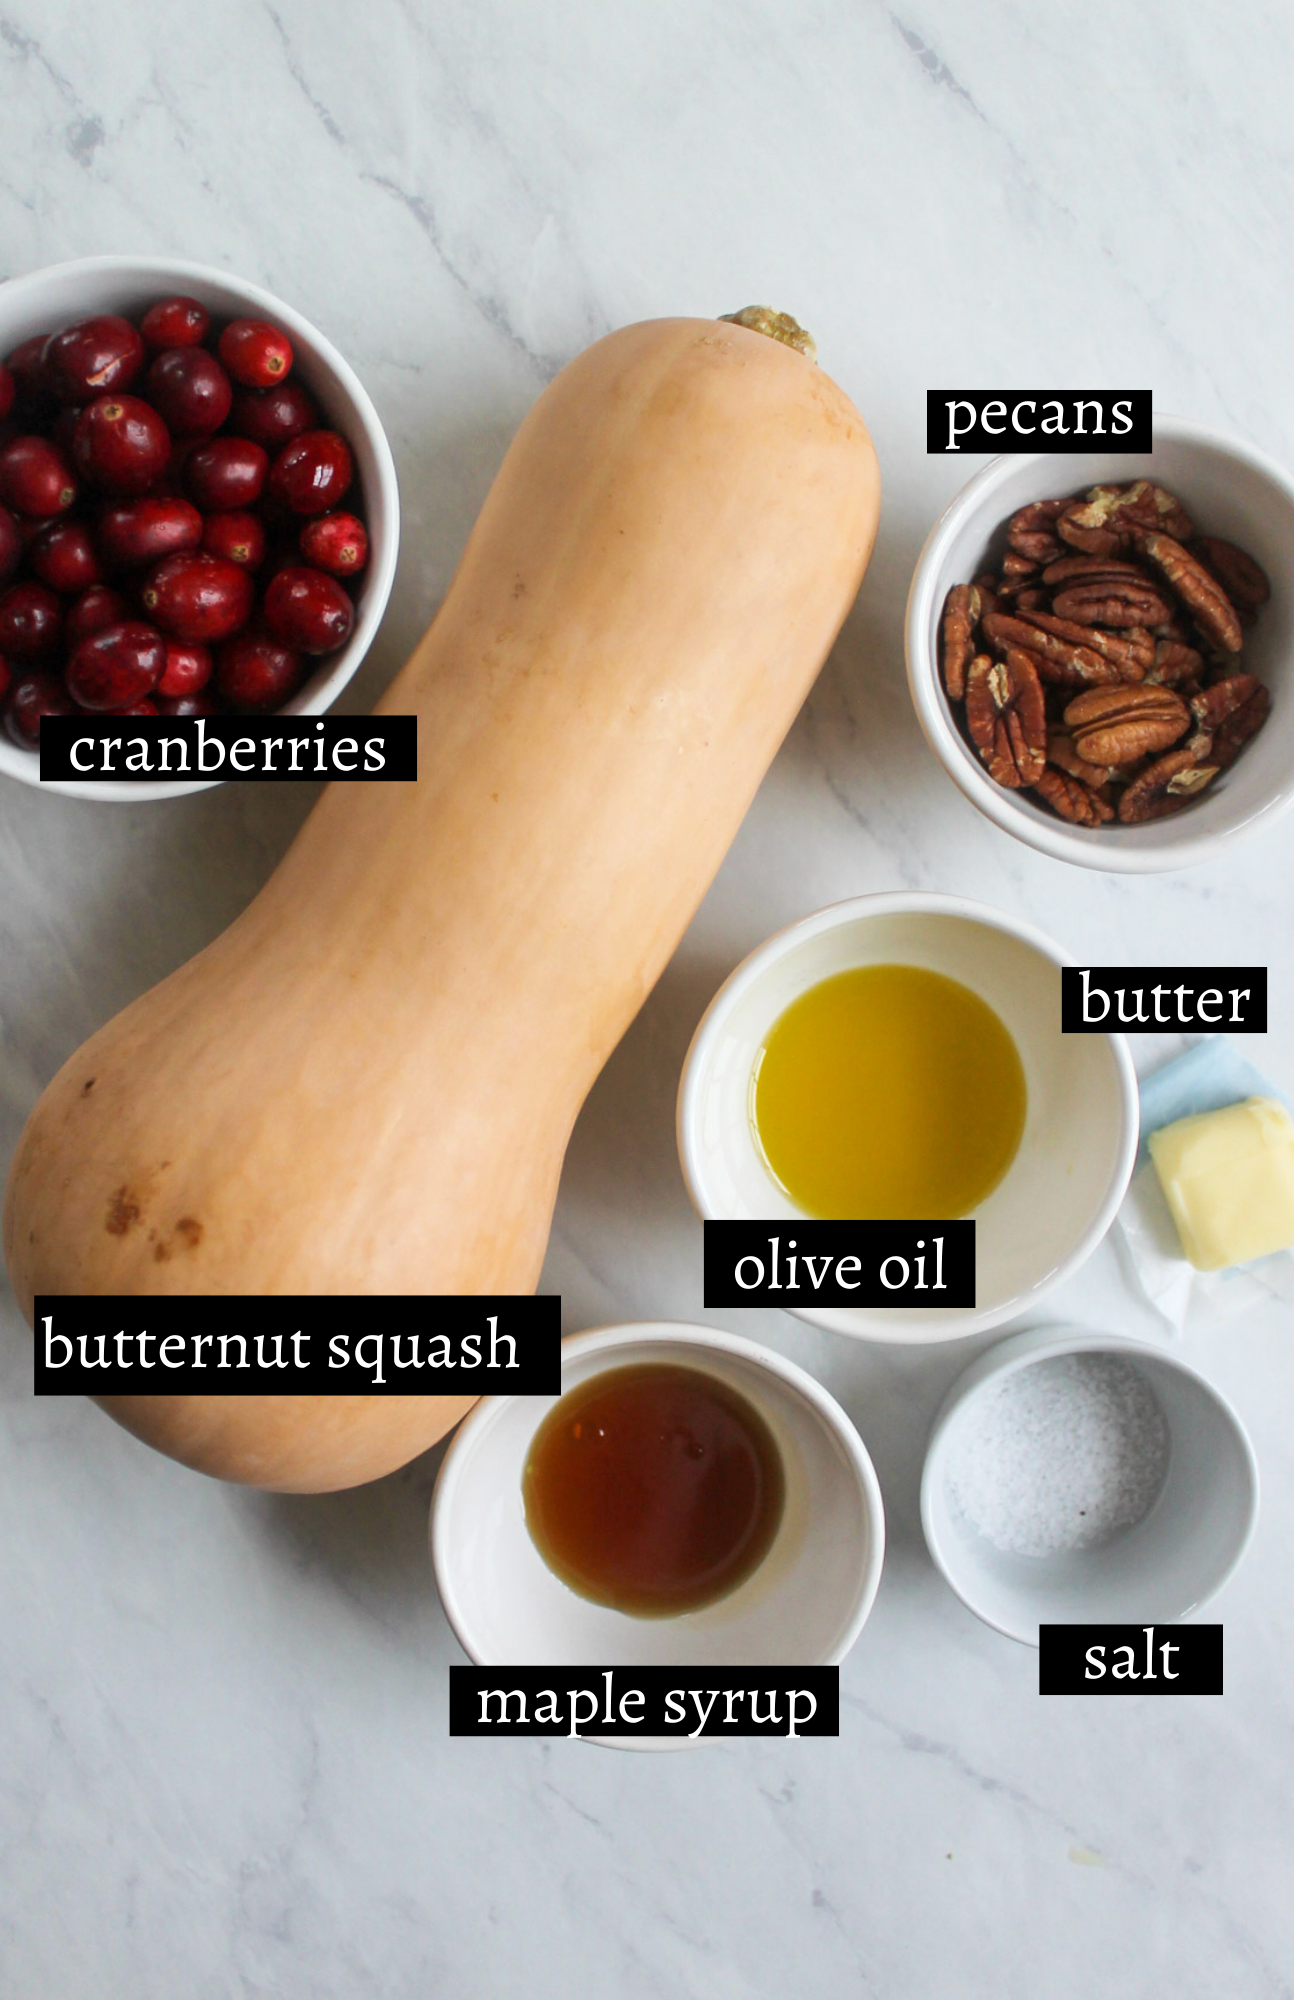 Labeled ingredients for Maple Roasted Butternut Squash with Cranberries and Pecans